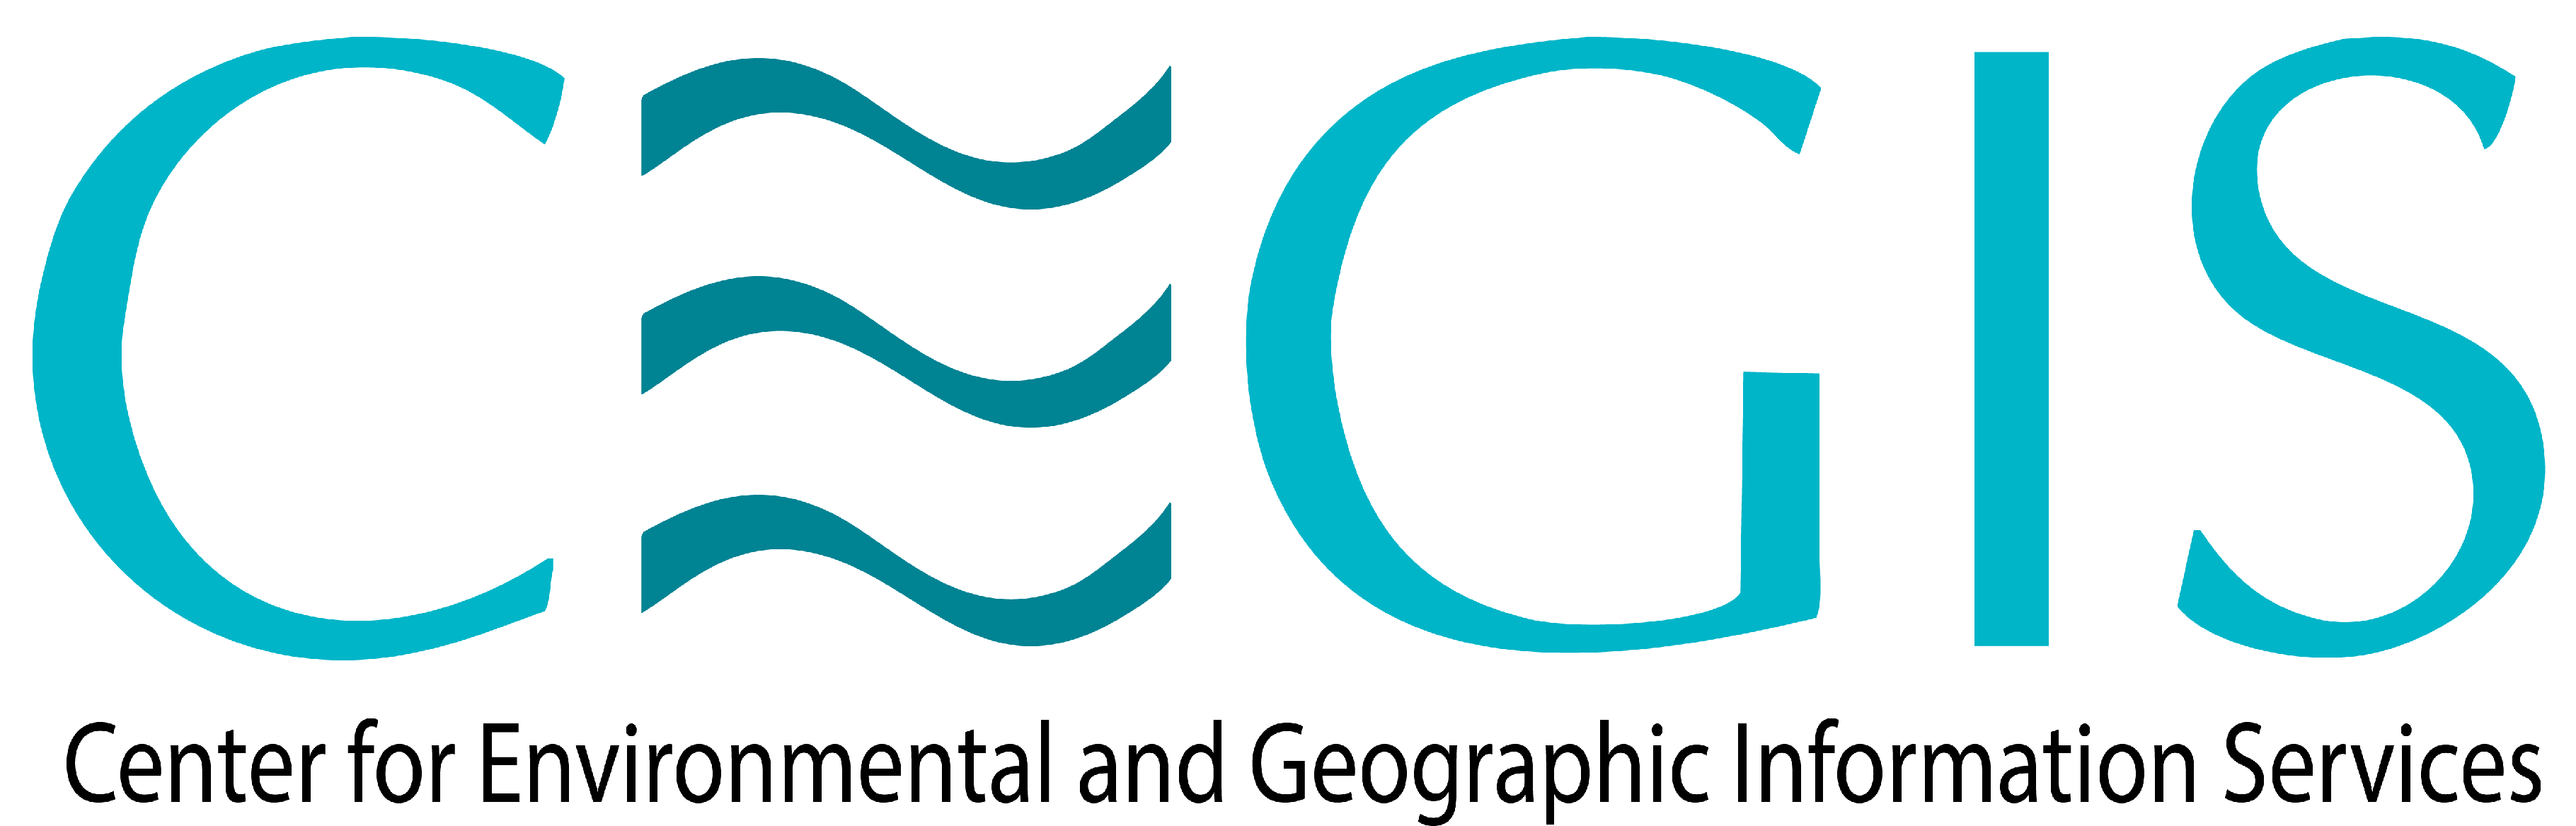 Center for Environmental and Geographic Information Services (CEGIS)